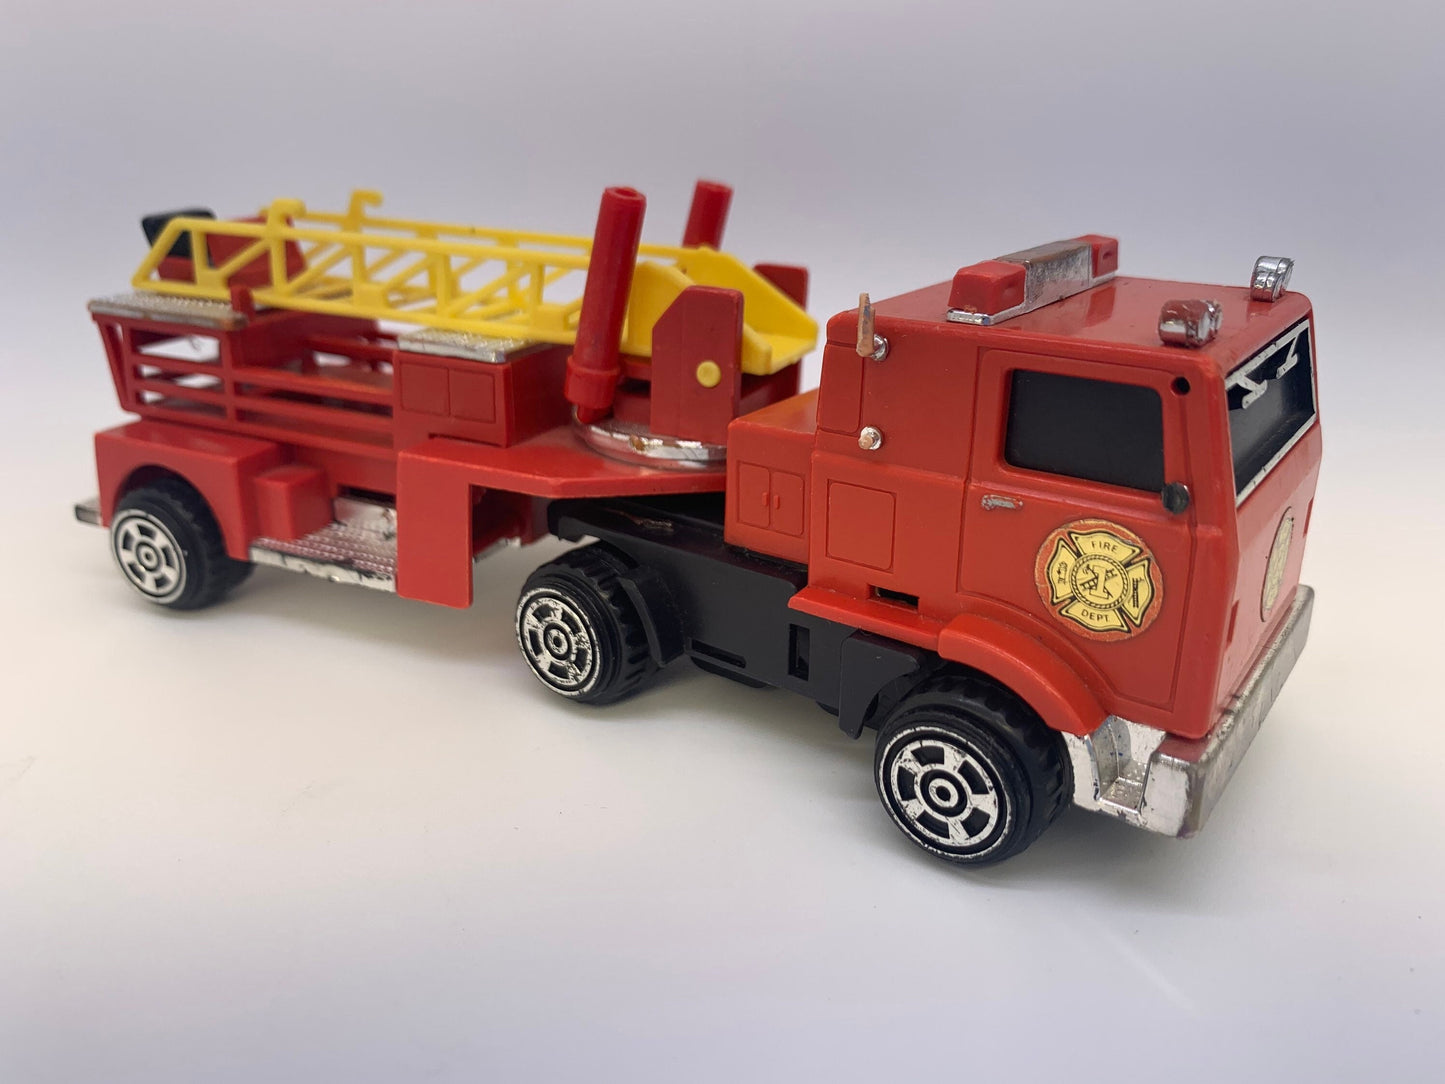 1976 Tiny Mighty Mo Fire Ladder Engine Truck Red IDEAL Collectable Miniature Scale Model Toy Car Perfect Birthday Gift